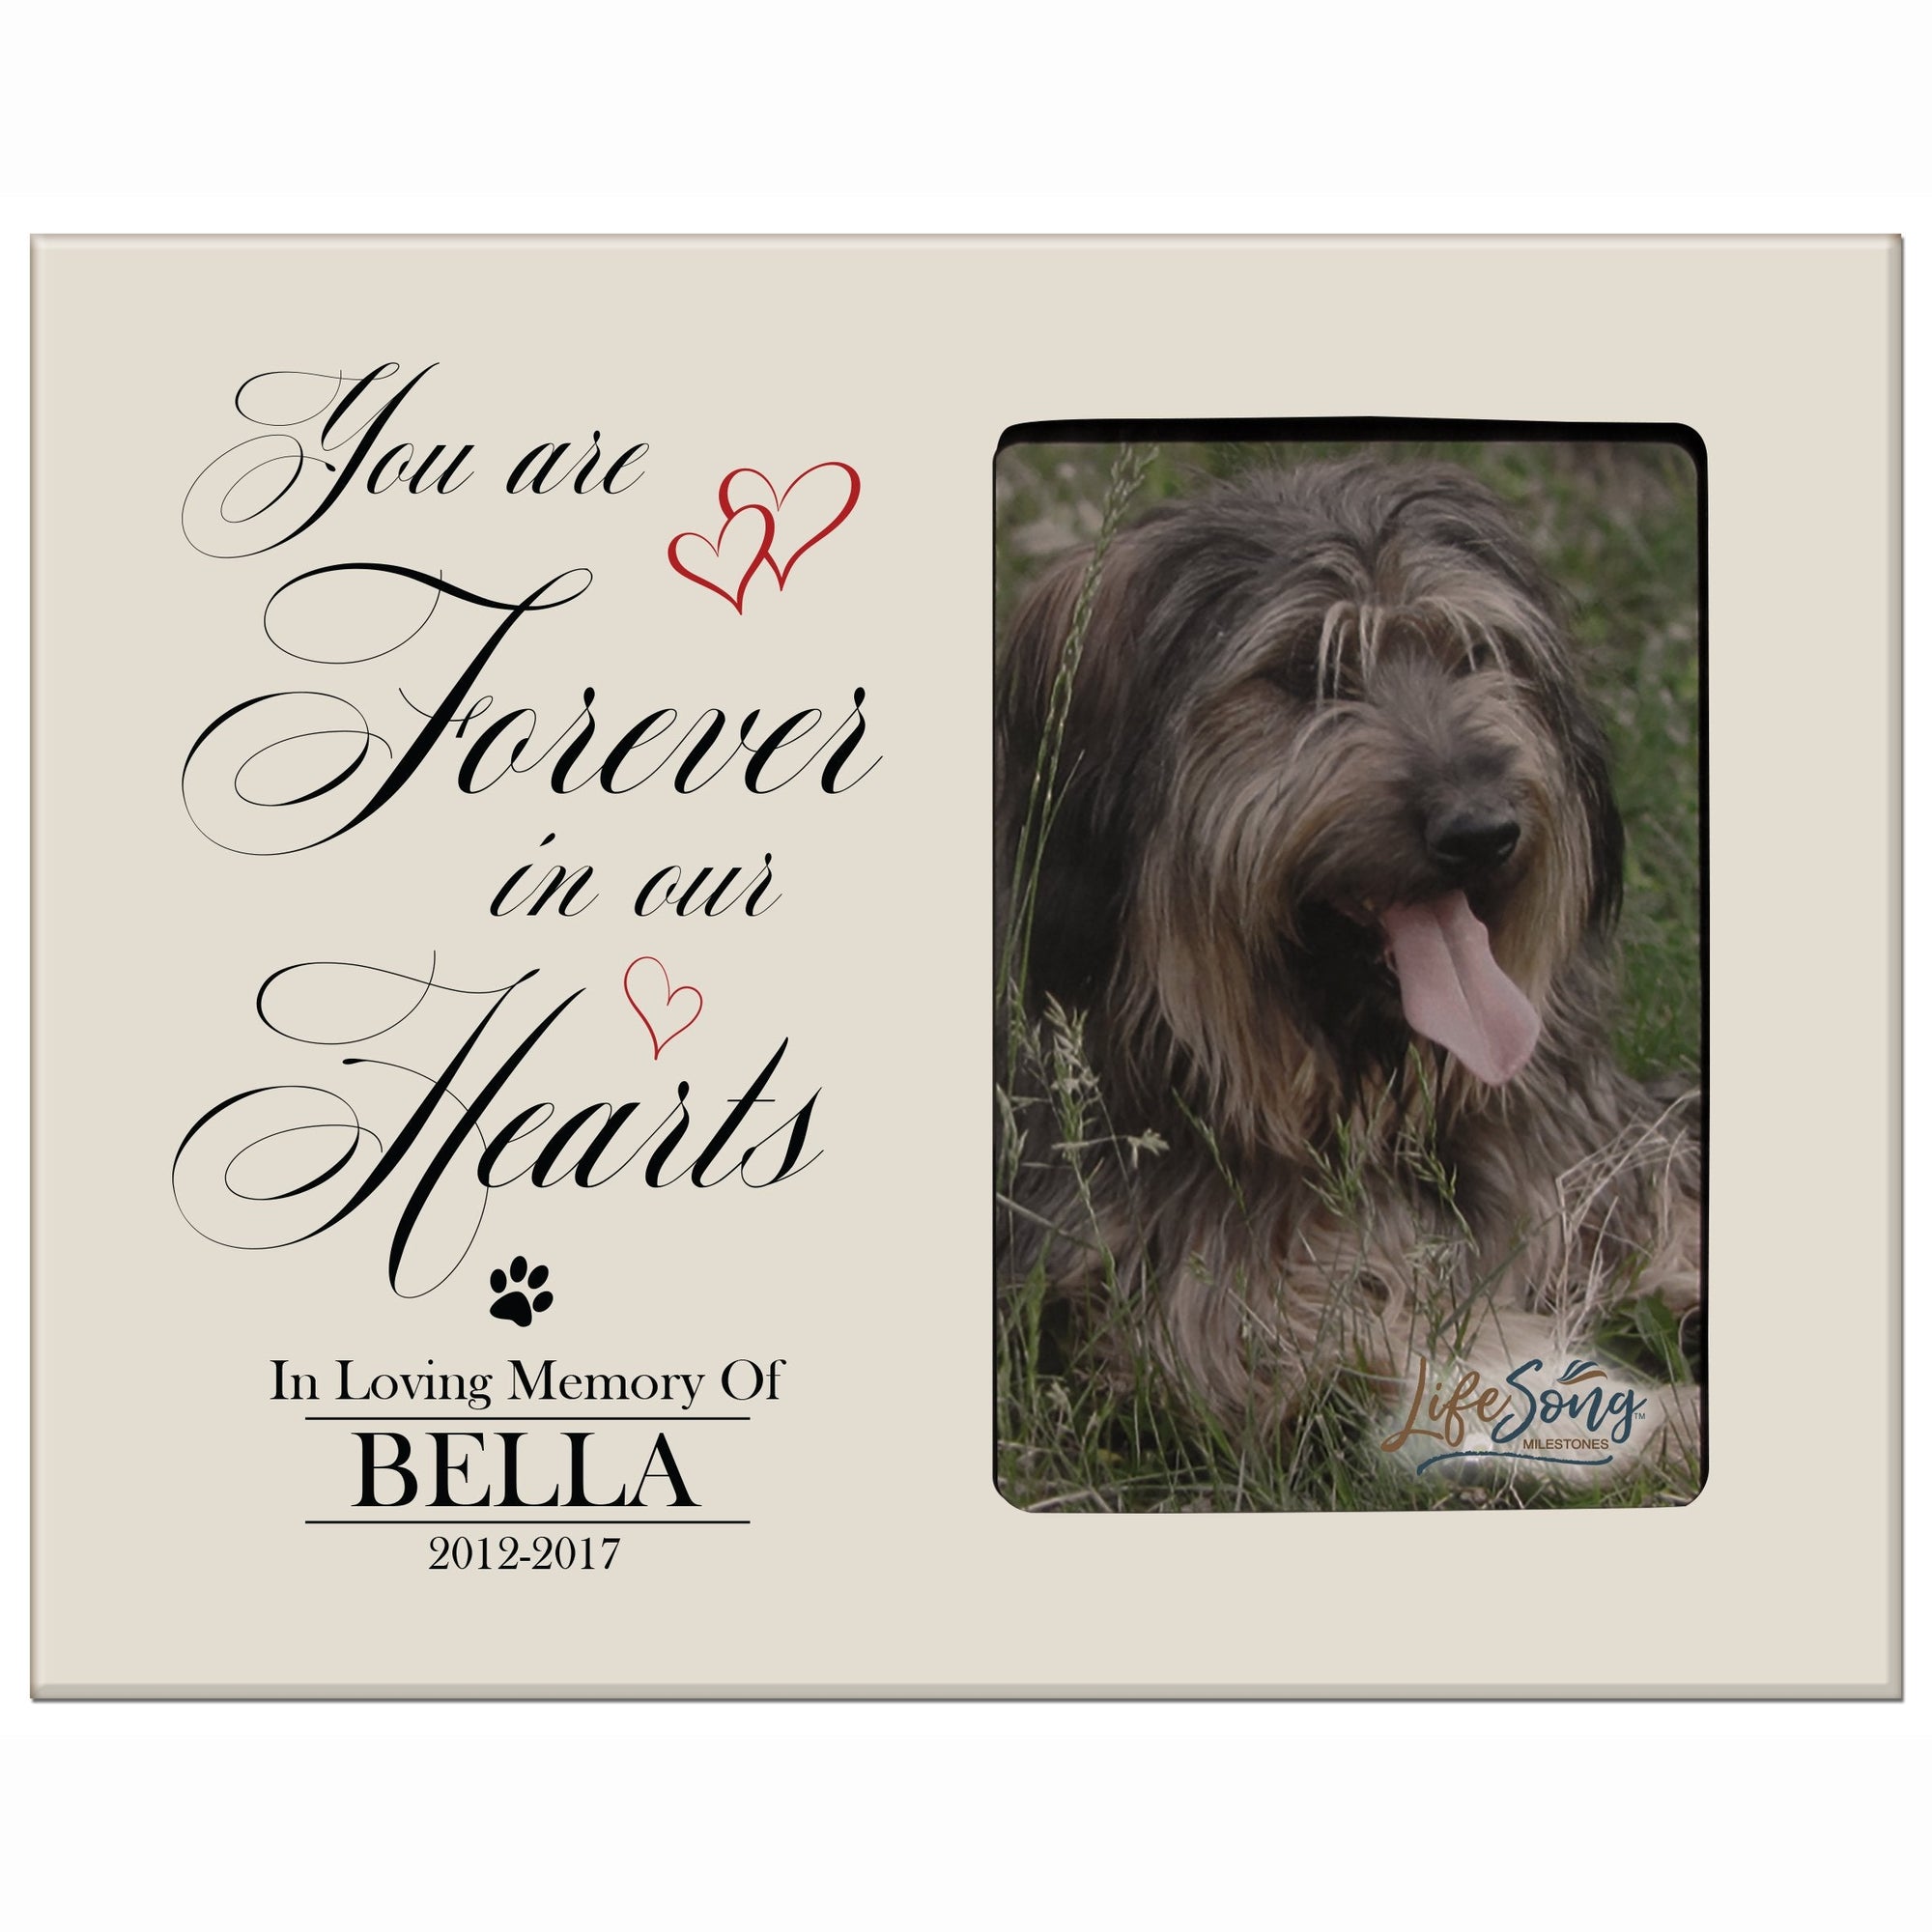 8x10 Ivory Pet Memorial Picture Frame with the phrase "You Are Forever In Our Hearts"